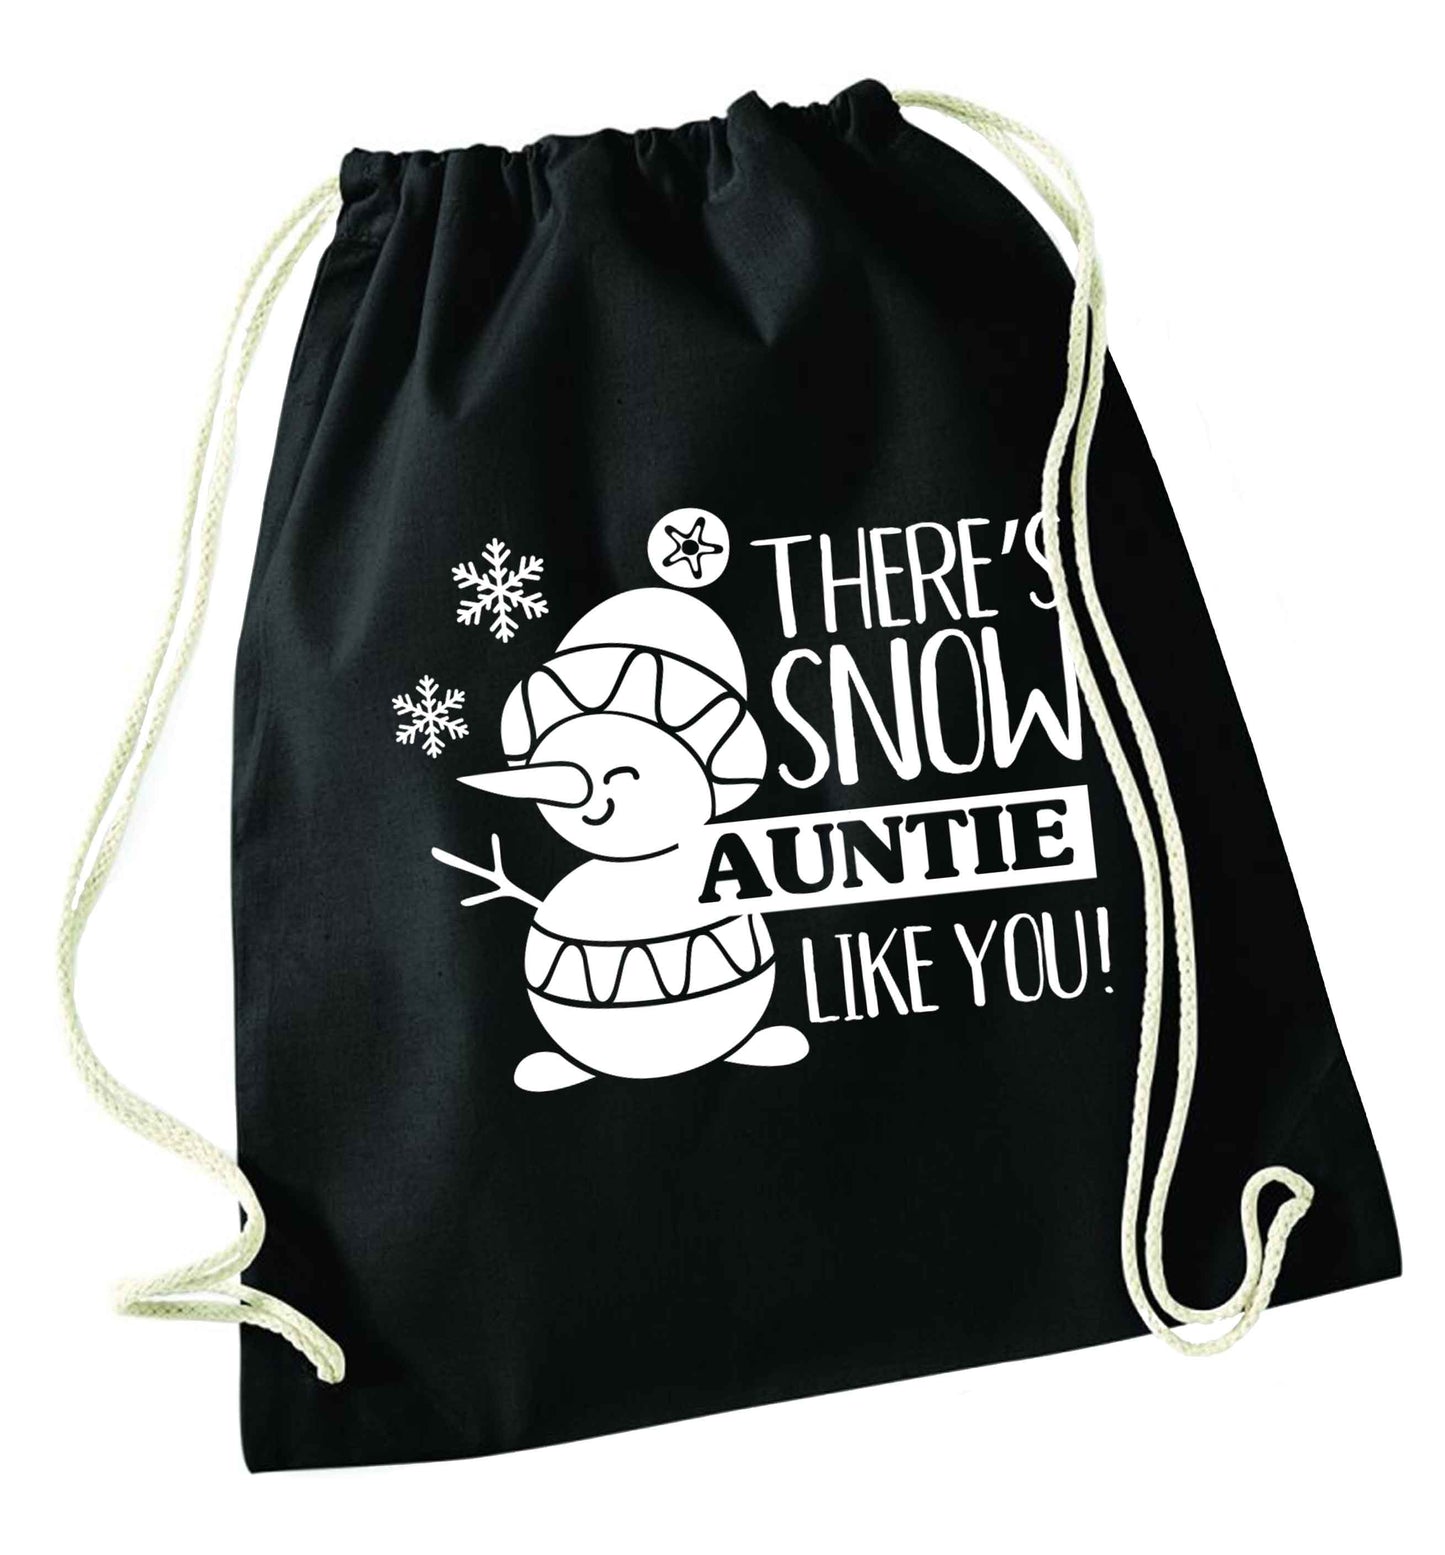 There's snow auntie like you black drawstring bag